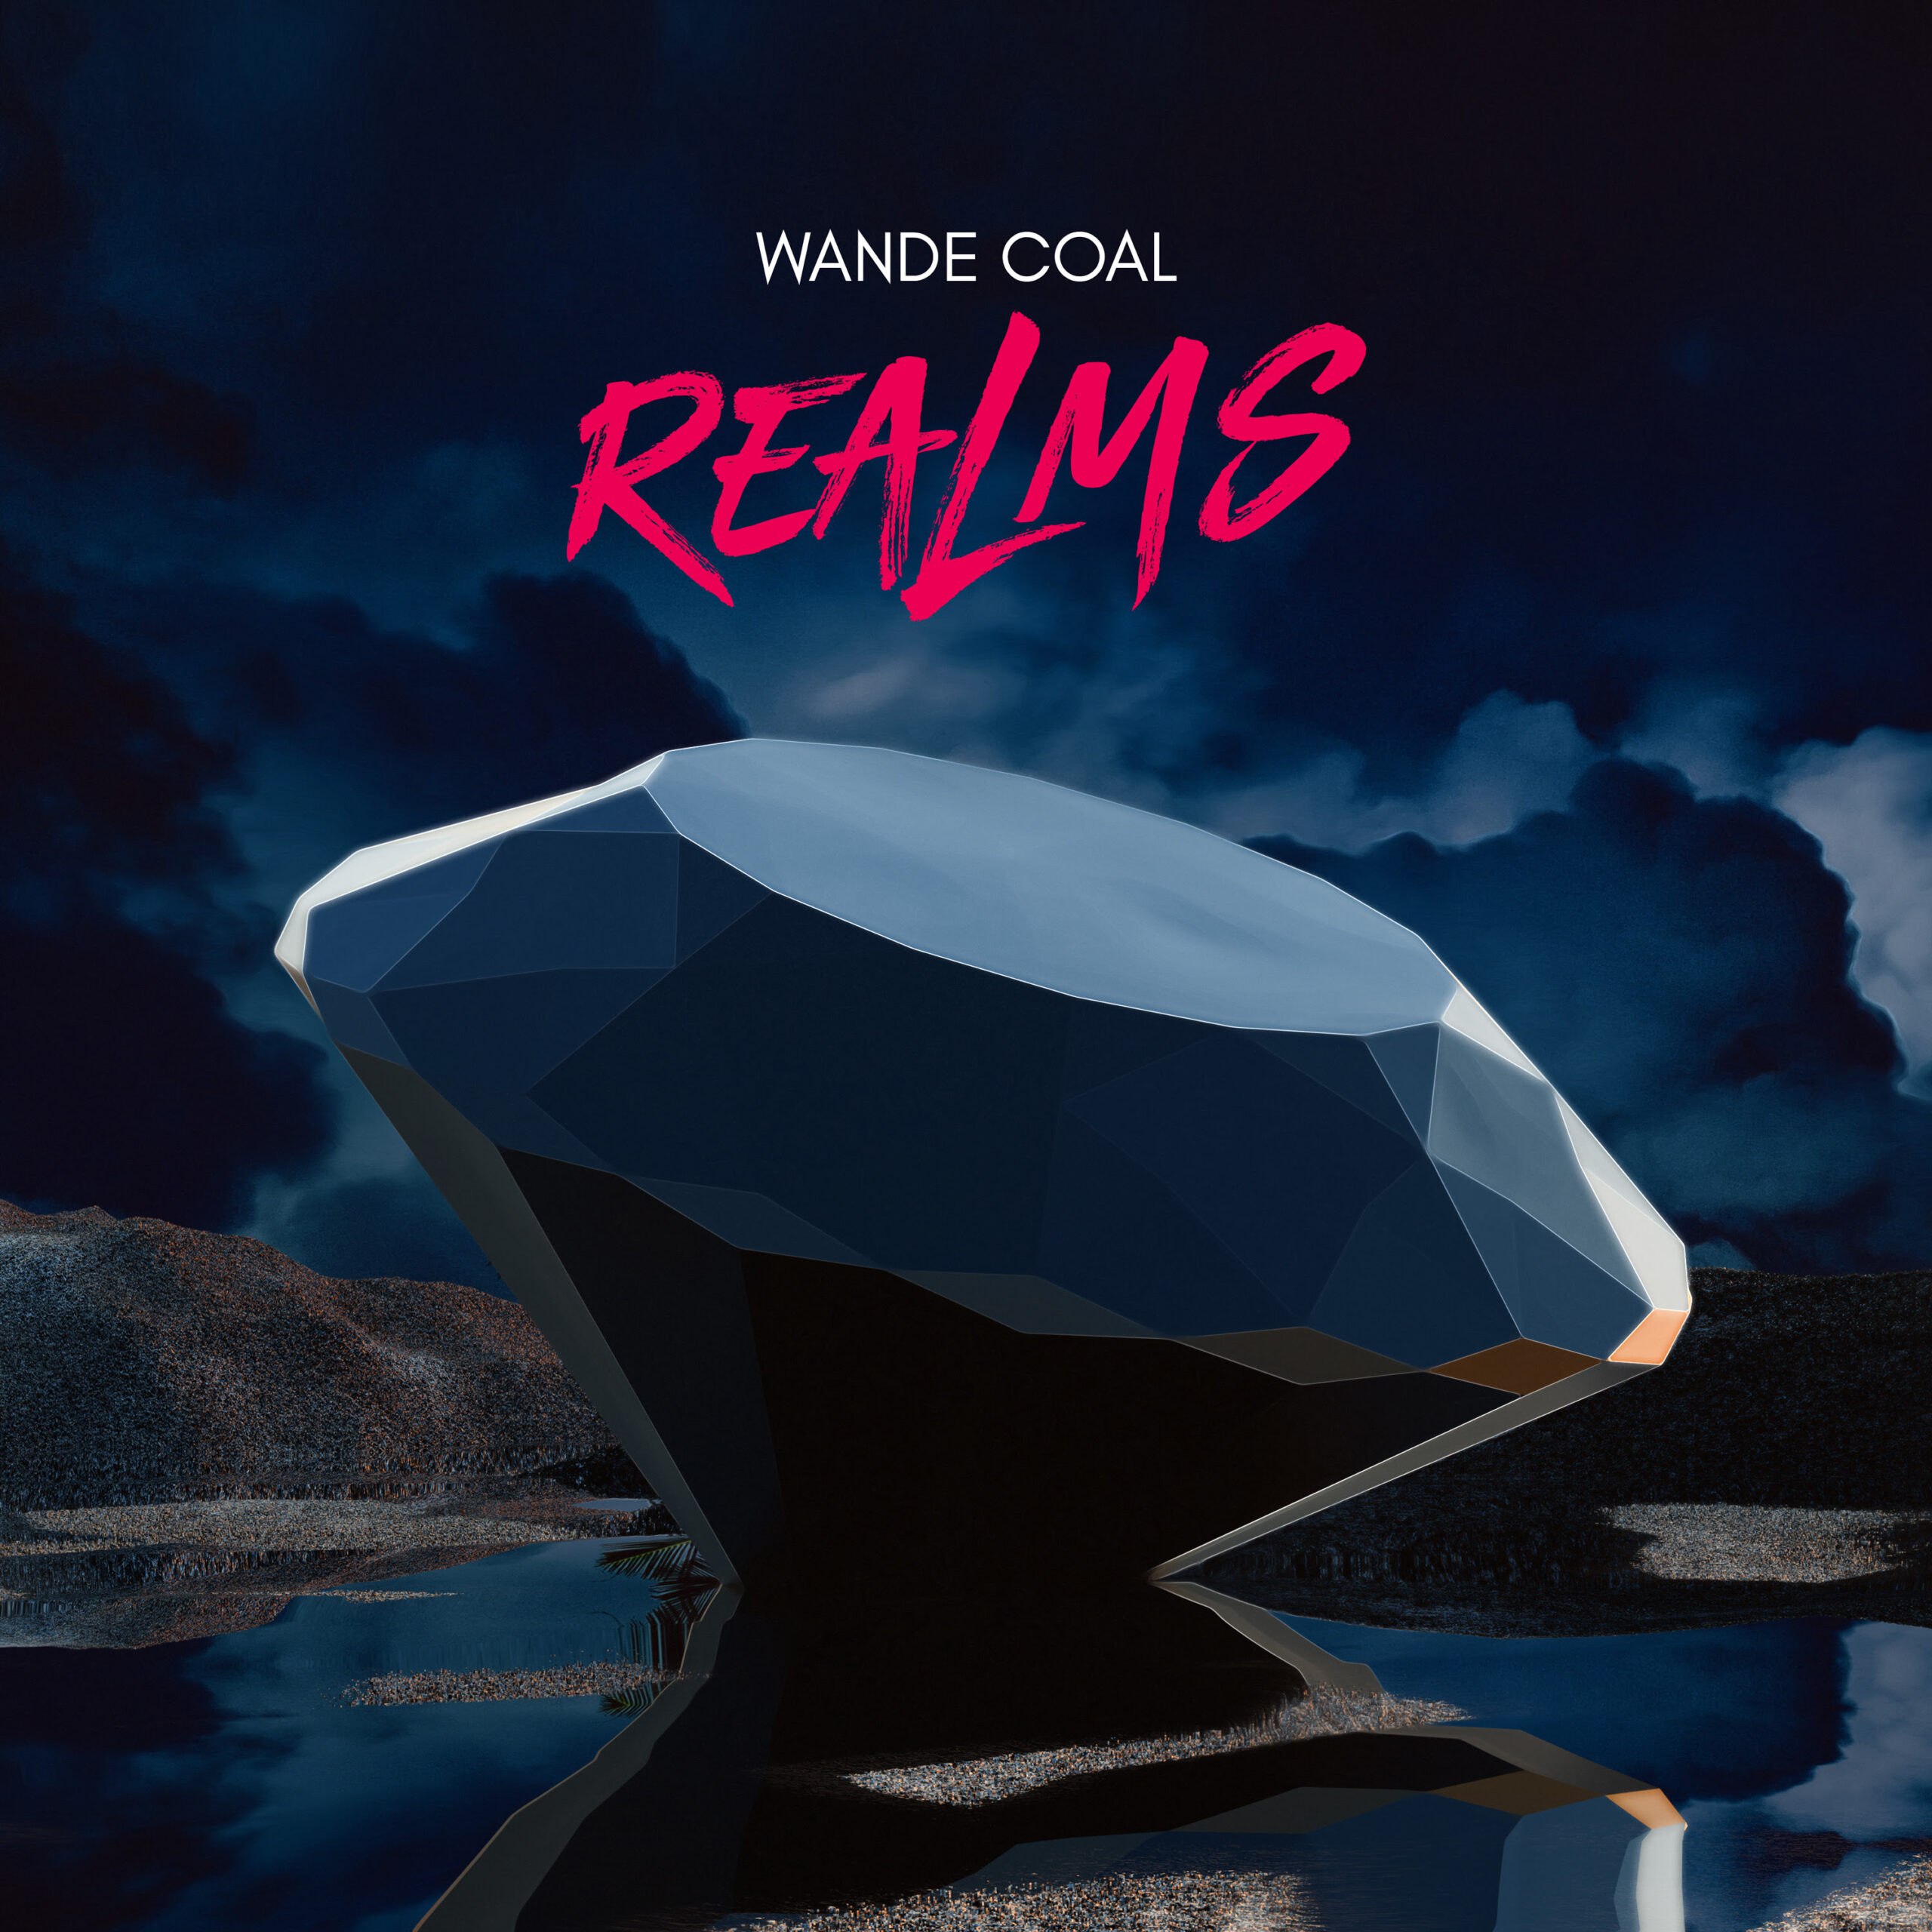 Wande Coal Delivers The New “Realms” EP